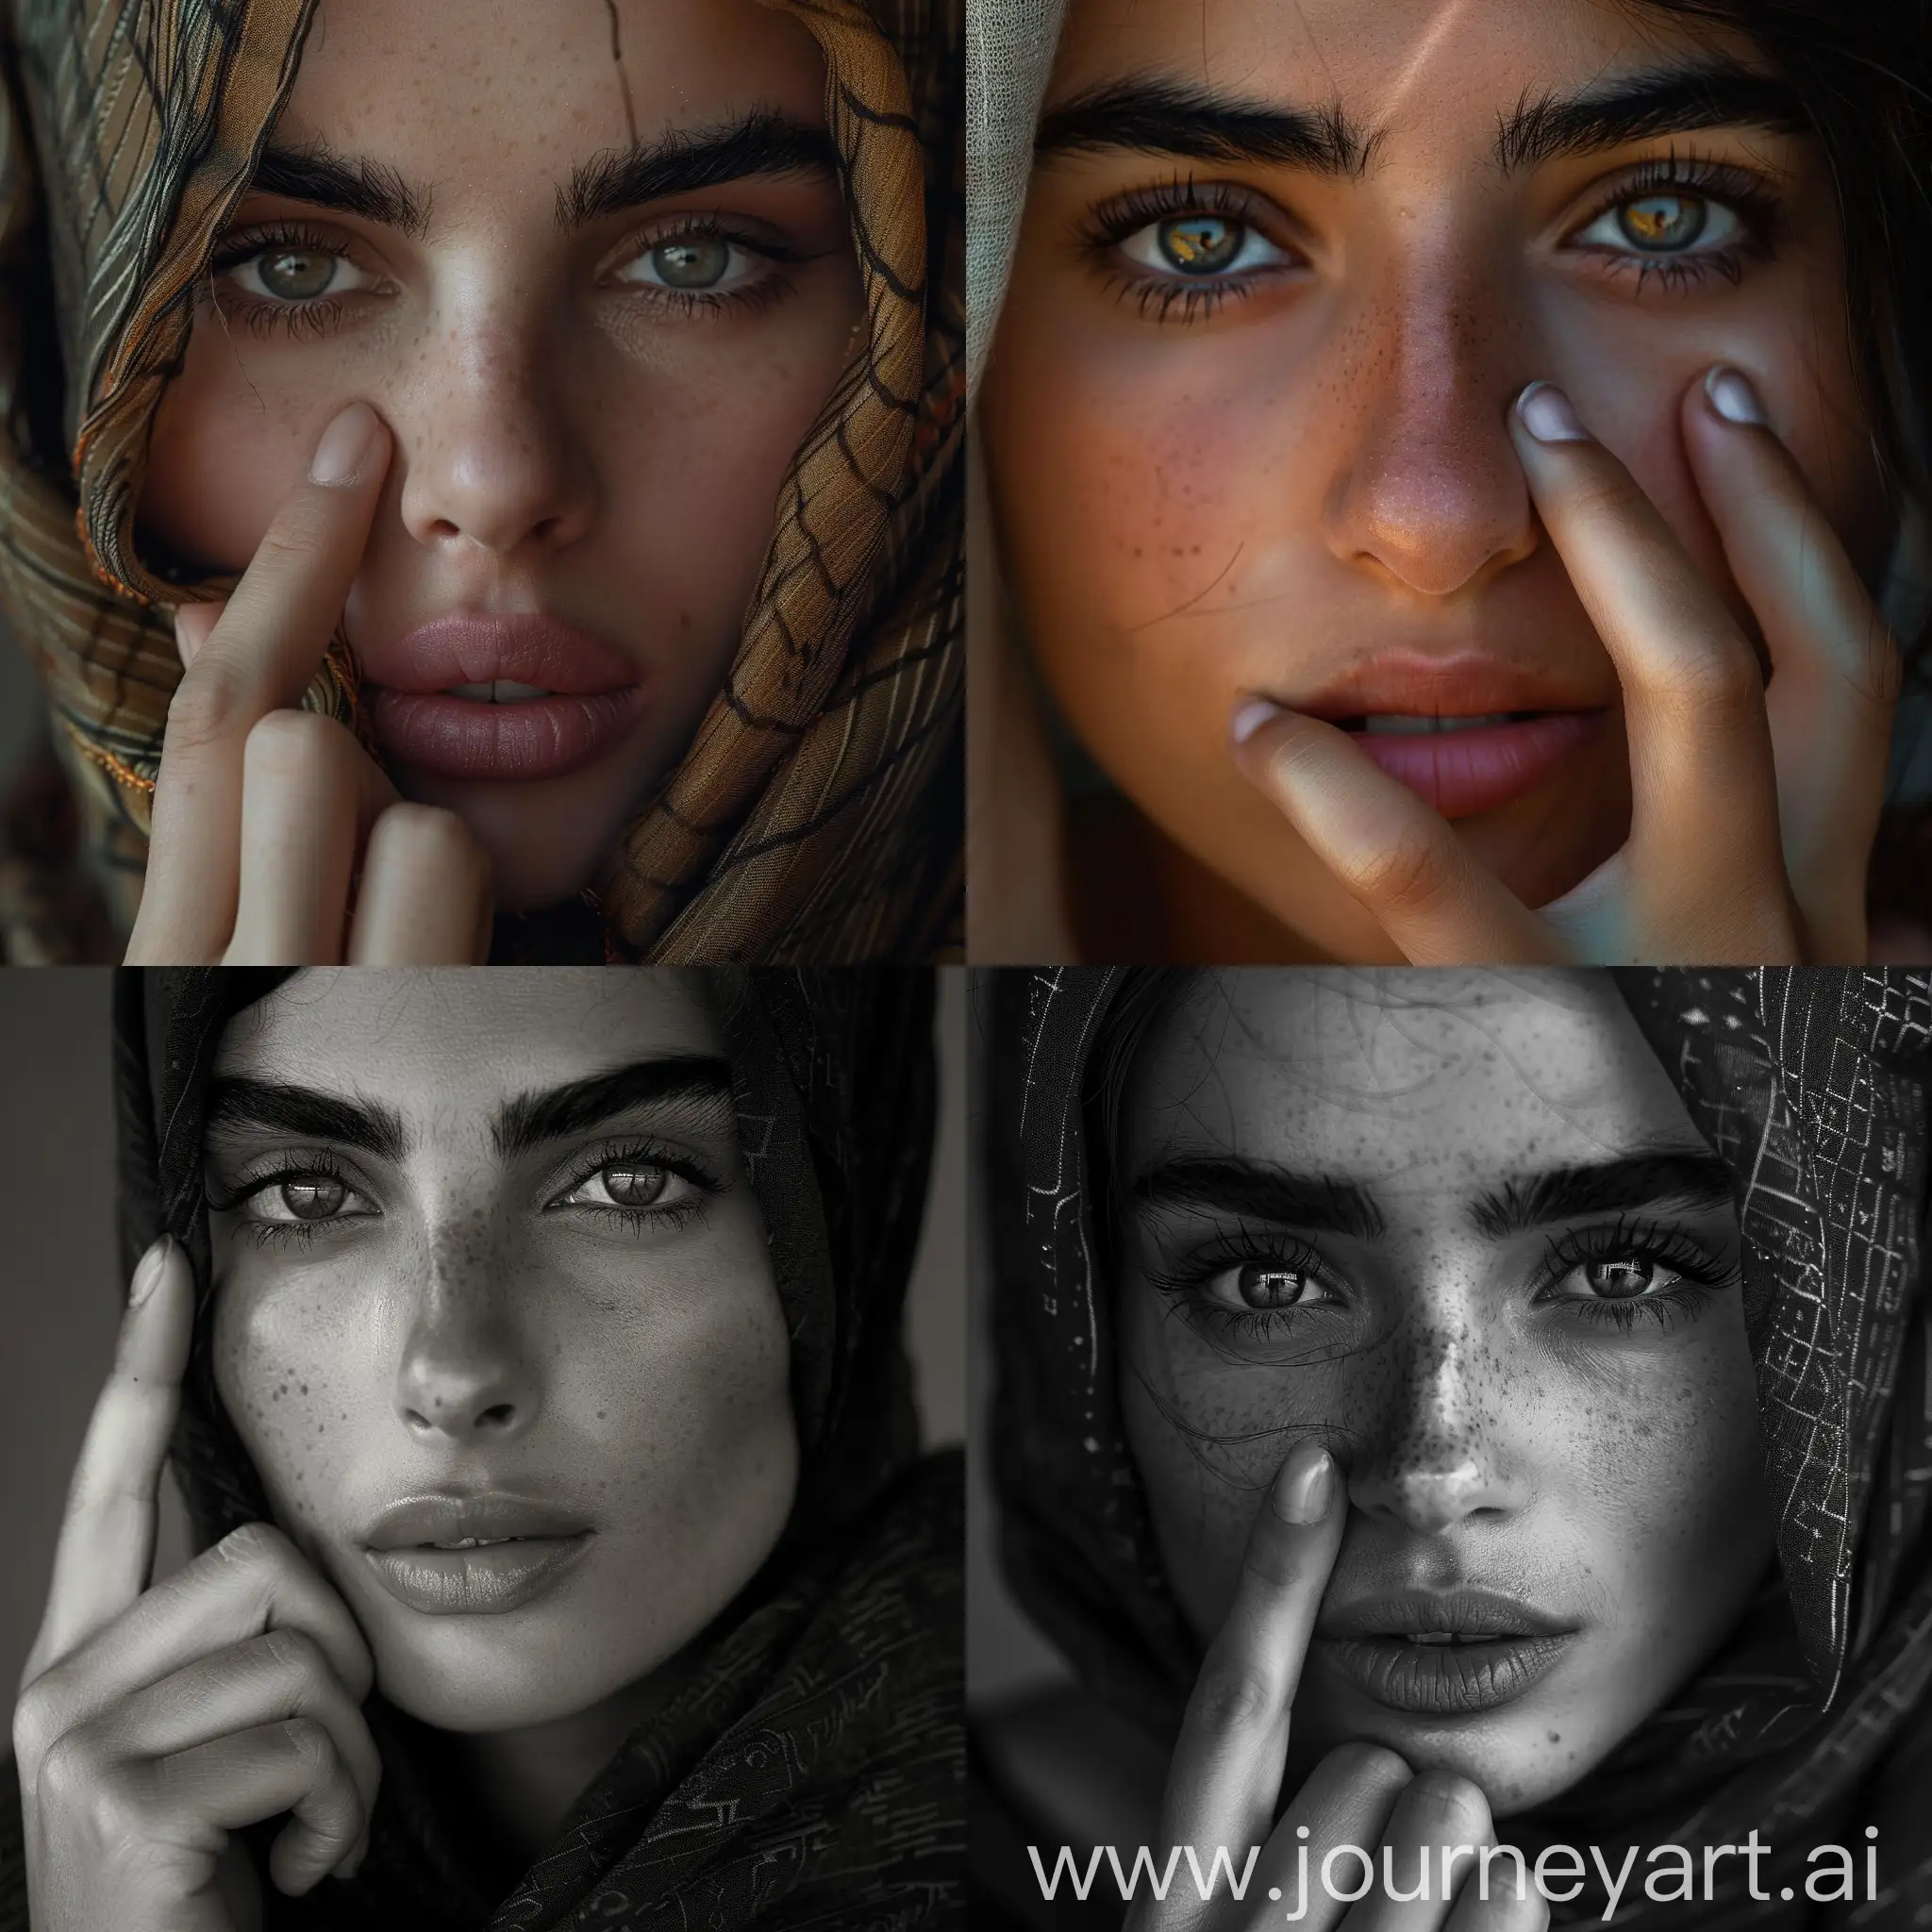 Photograph: Professional portrait of a Palestinian Woman, bushy eyebrows, somber look, broad and big nose, top model, one finger on lips